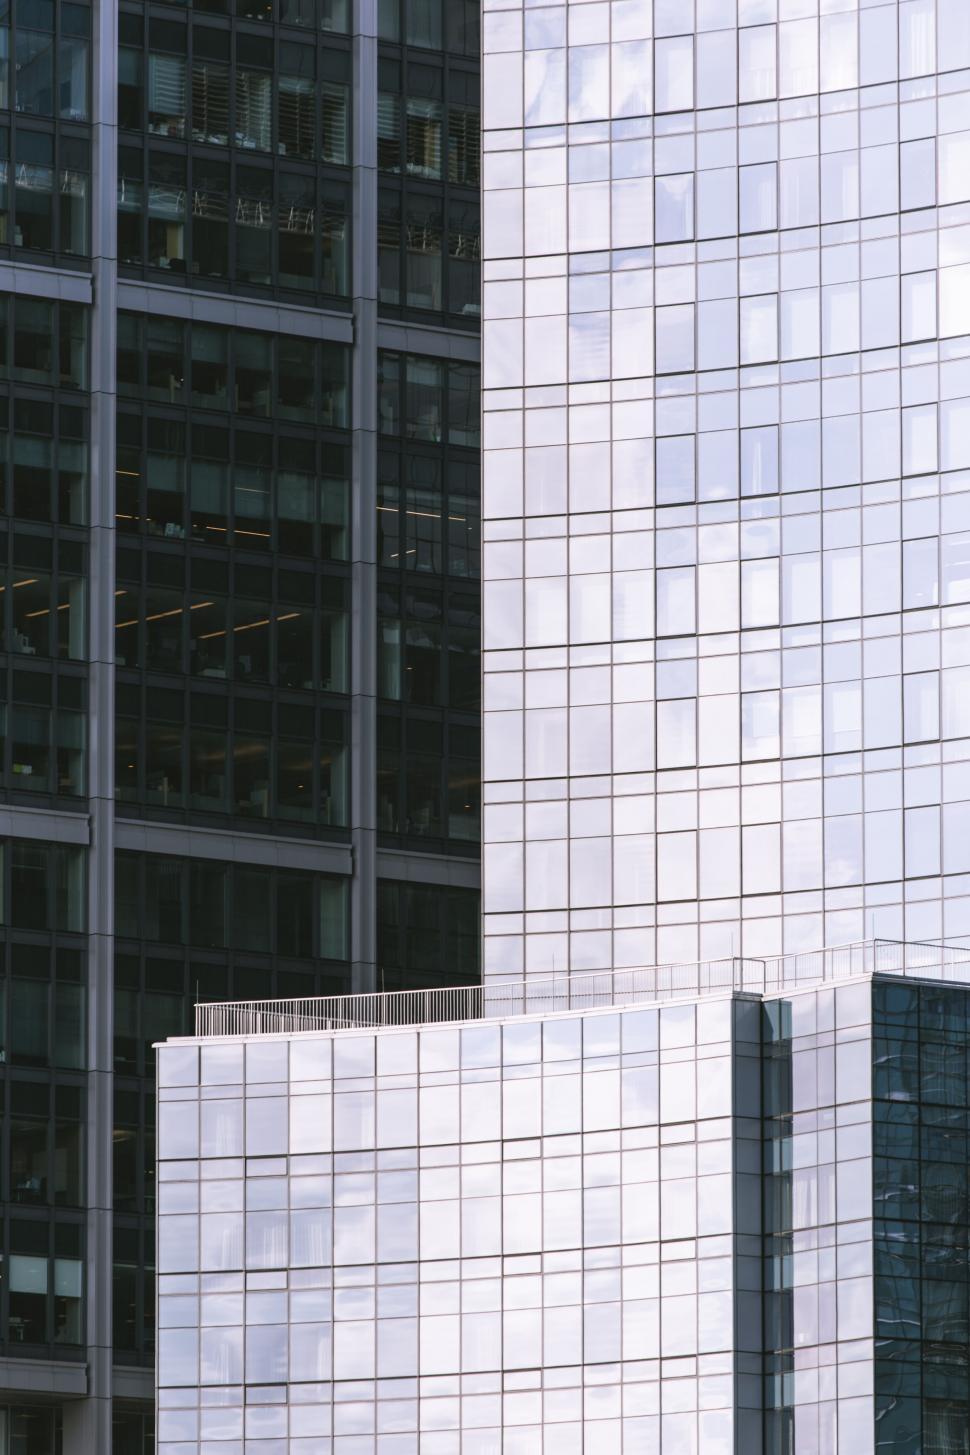 Free Image of Reflective blue glass in urban building design 